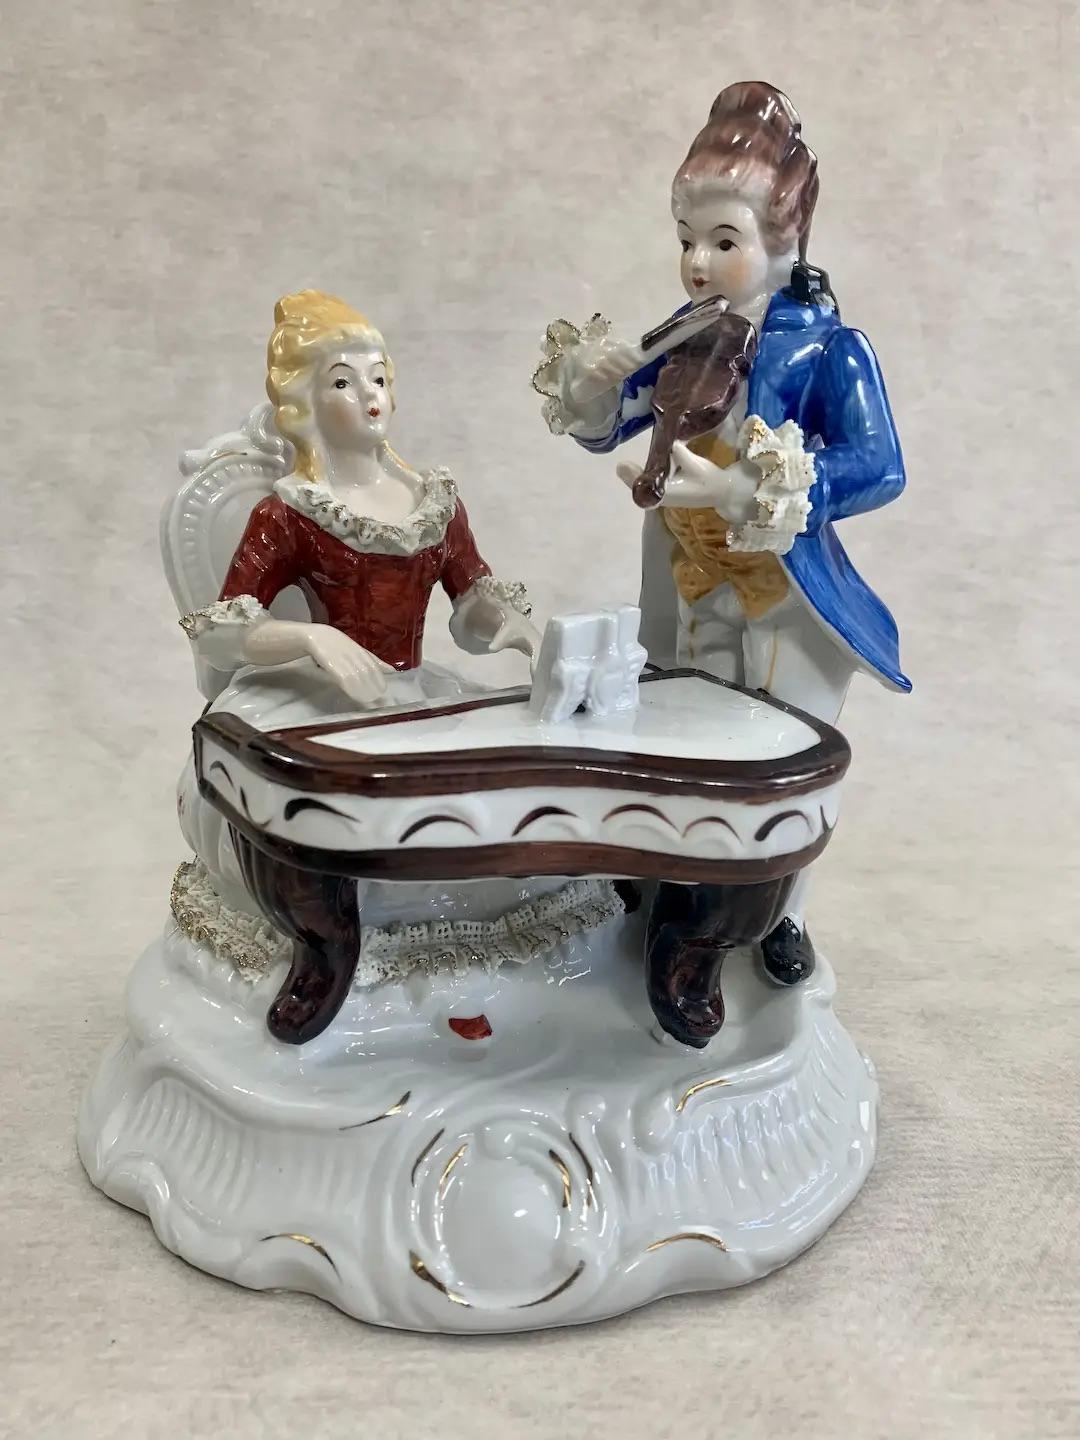 Vintage porcelain figurine evoking the style of the highly sought romanticism of the Victorian era depicting a scene of two classical musicians, a pianist and violinist, engaged in a duet. Each figure is beautifully dressed in traditional formal